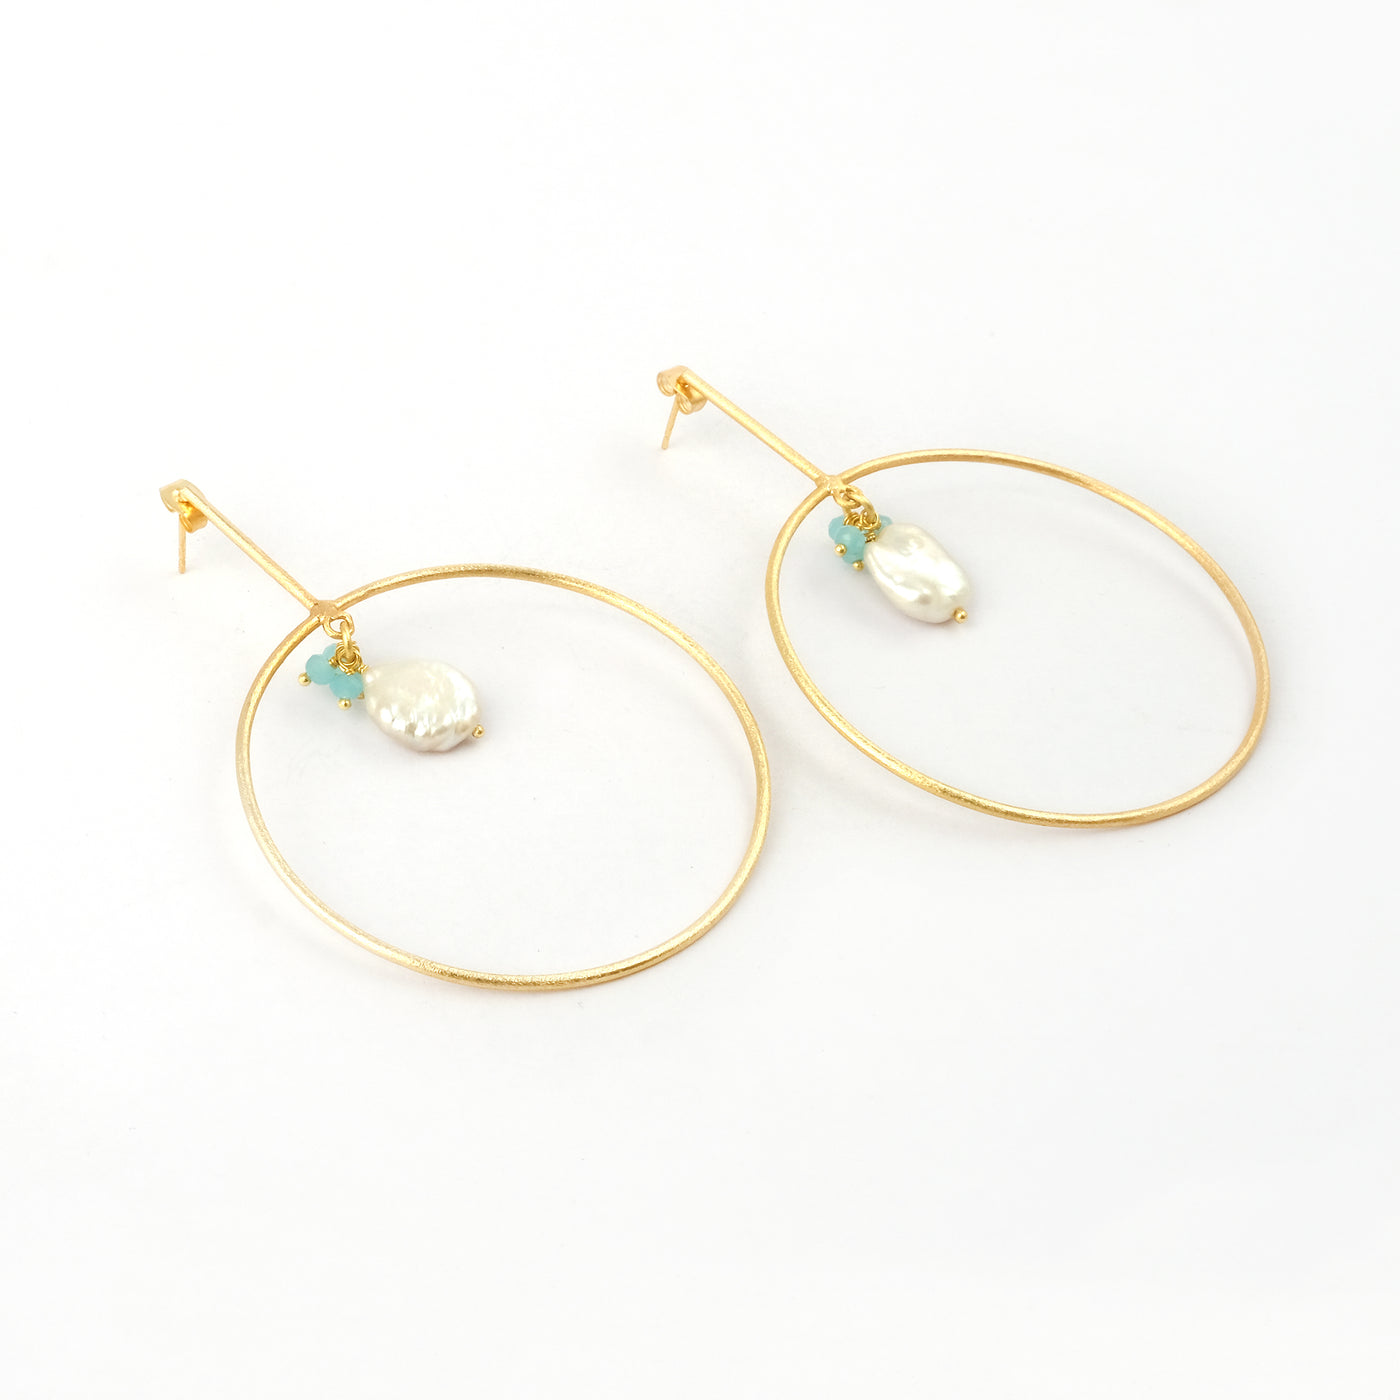 Gold Hoop Drop Earrings with Pearl and Chalcedony Accent